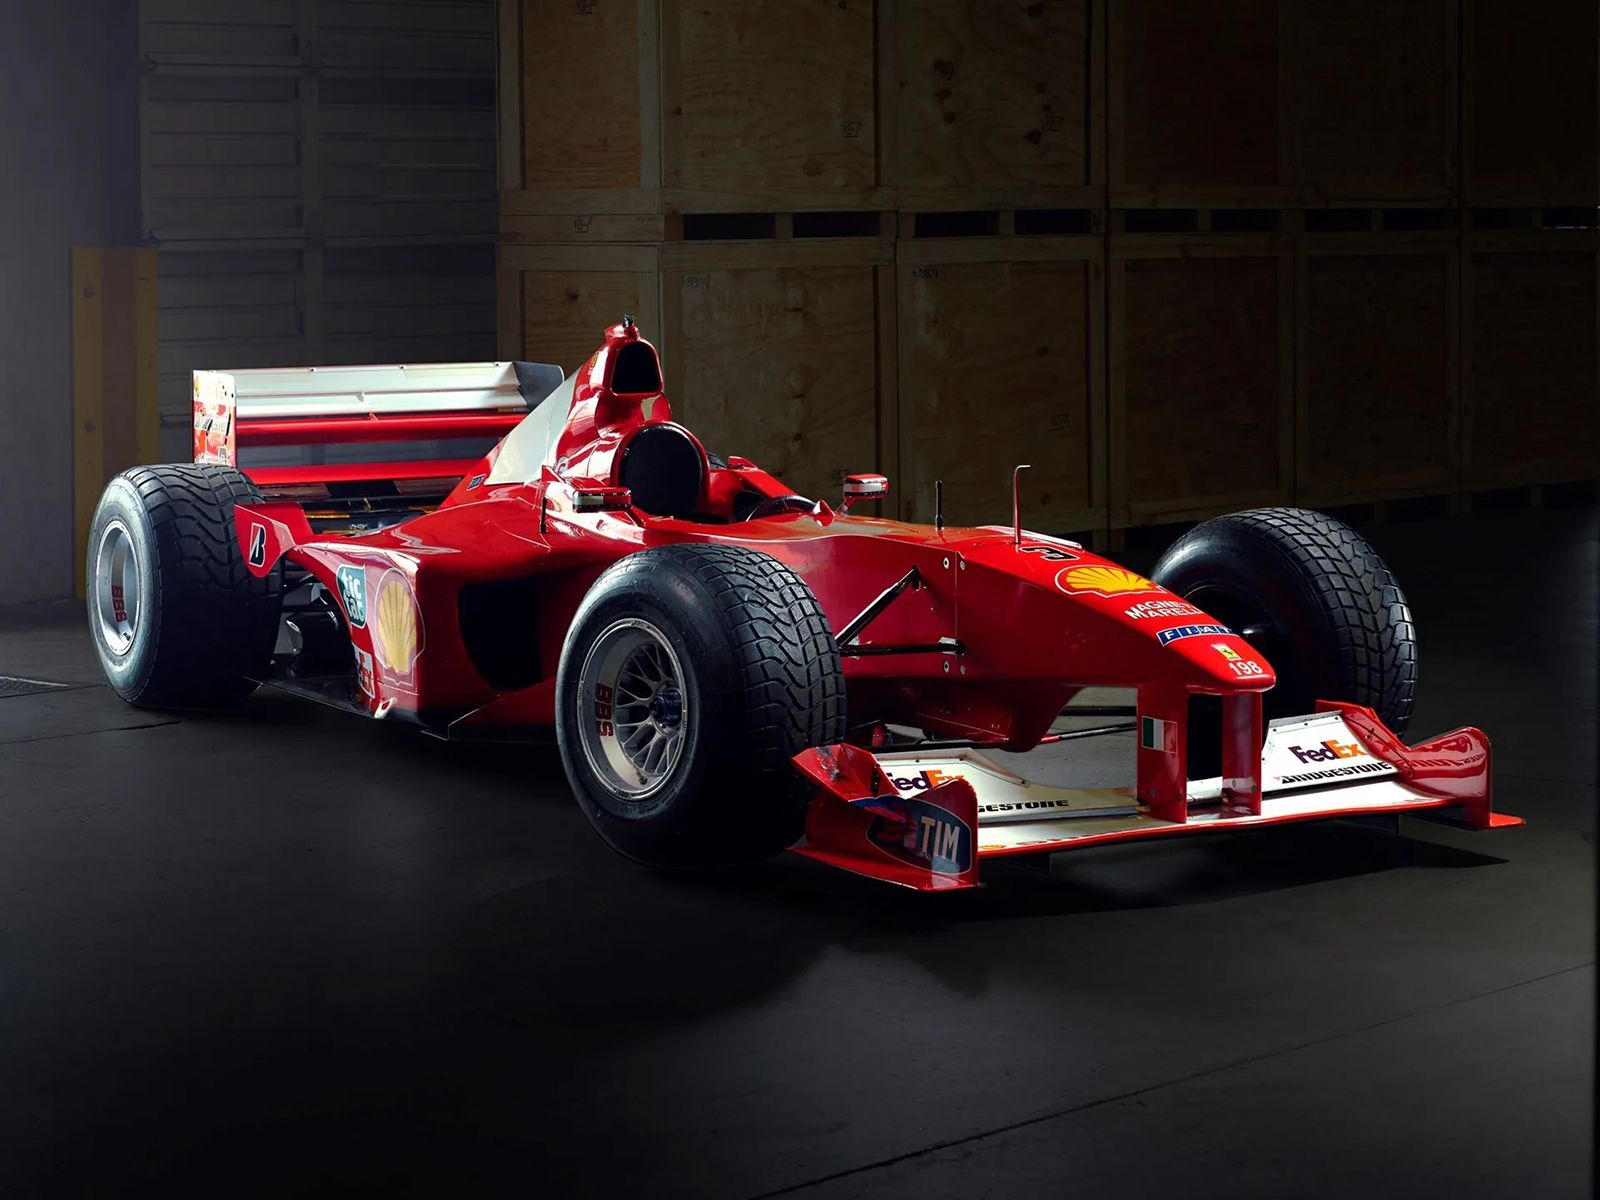 Michael Schumacher: Rare Ferrari racing car from 2000 season expected to  sell for up to $9.5 million